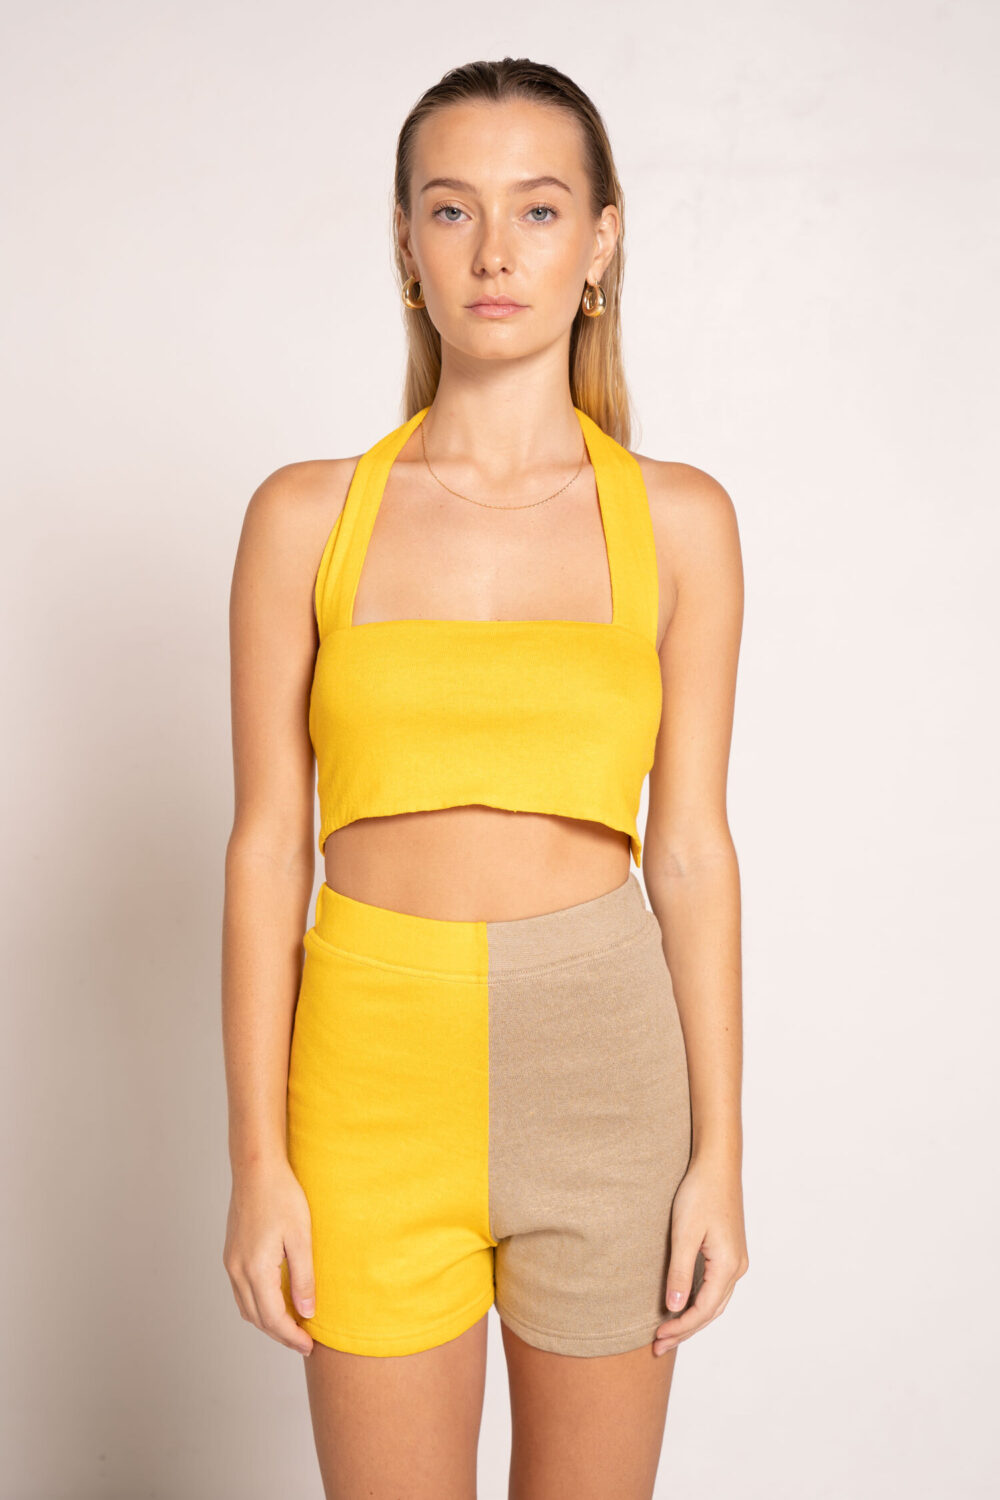 Justice Knit Halter Top Warm Yellow - Sentiment Brand